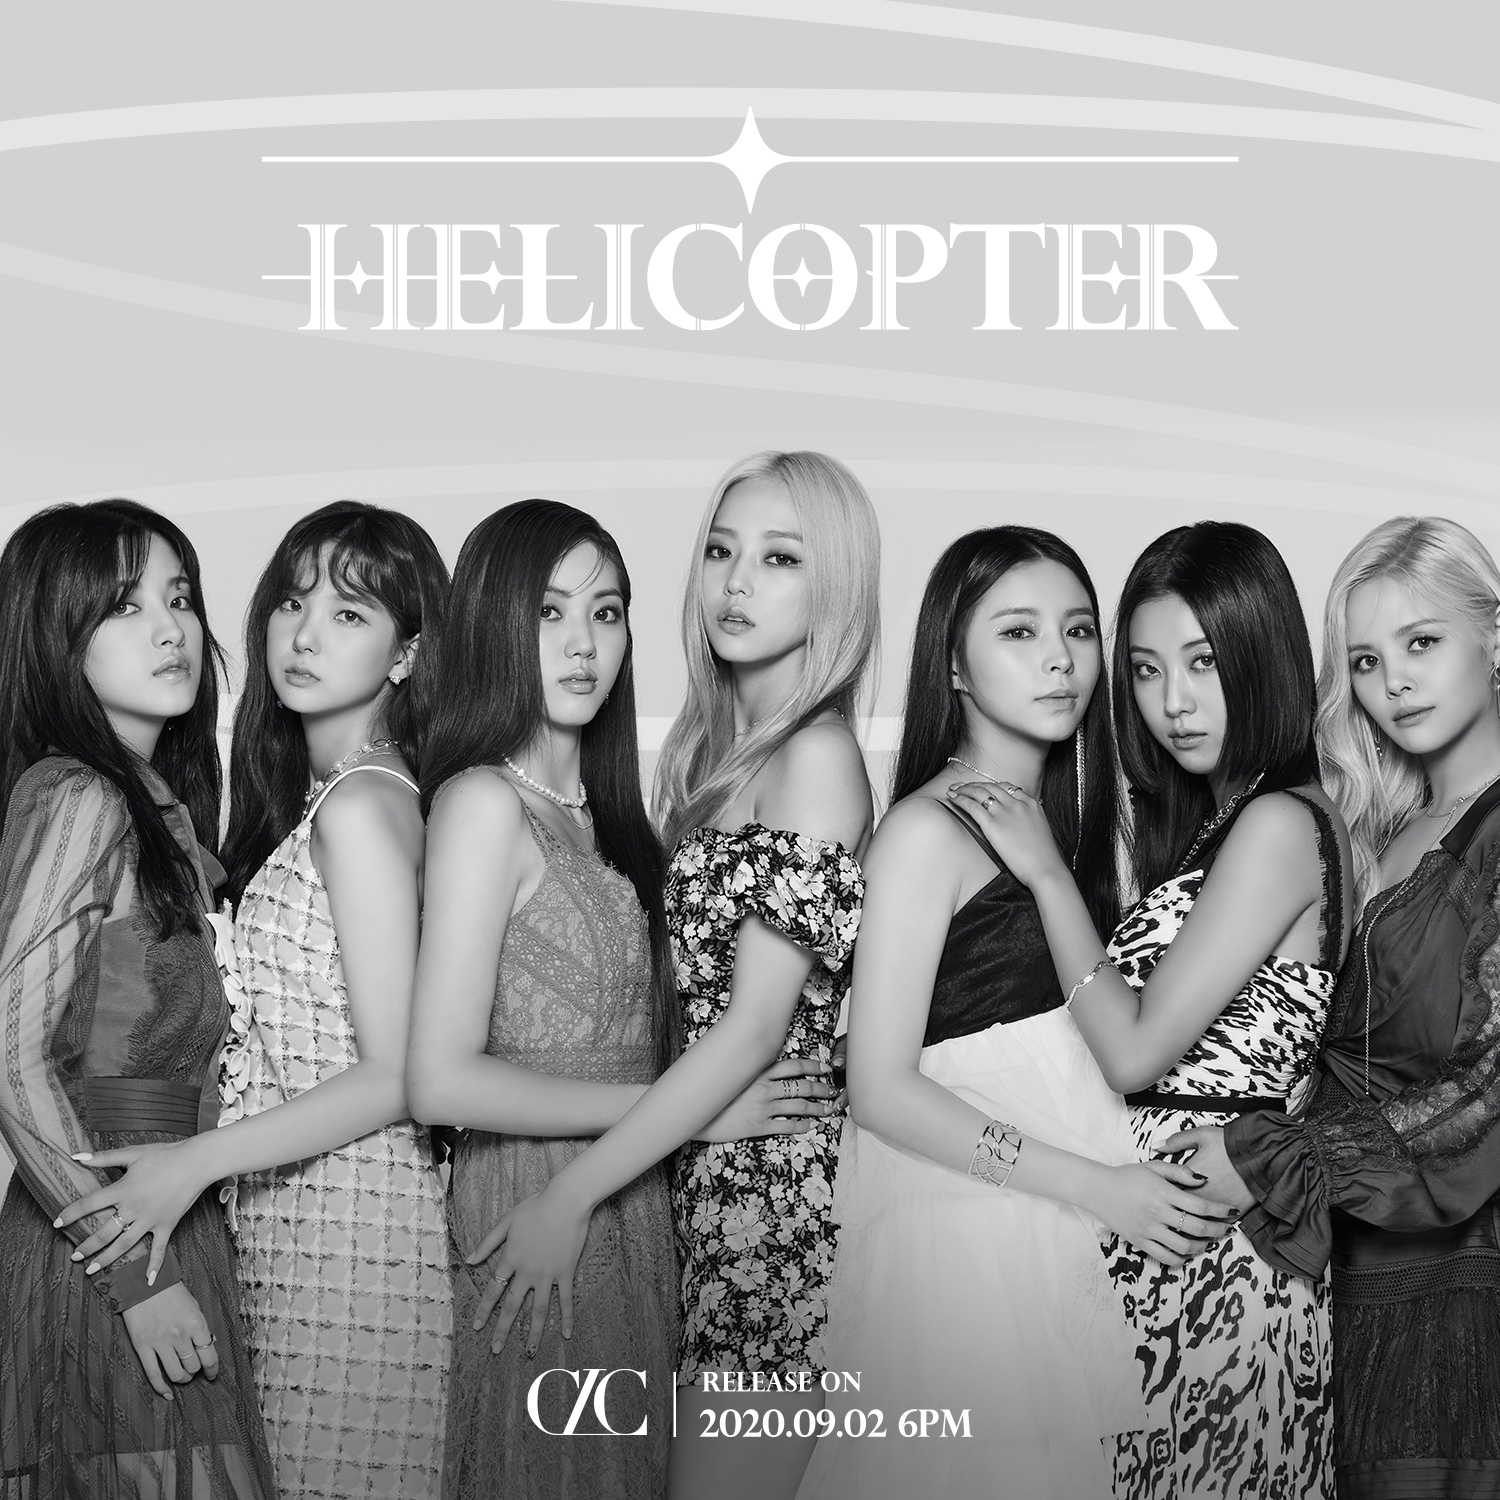 CLC Helicopter Teaser 2 Group